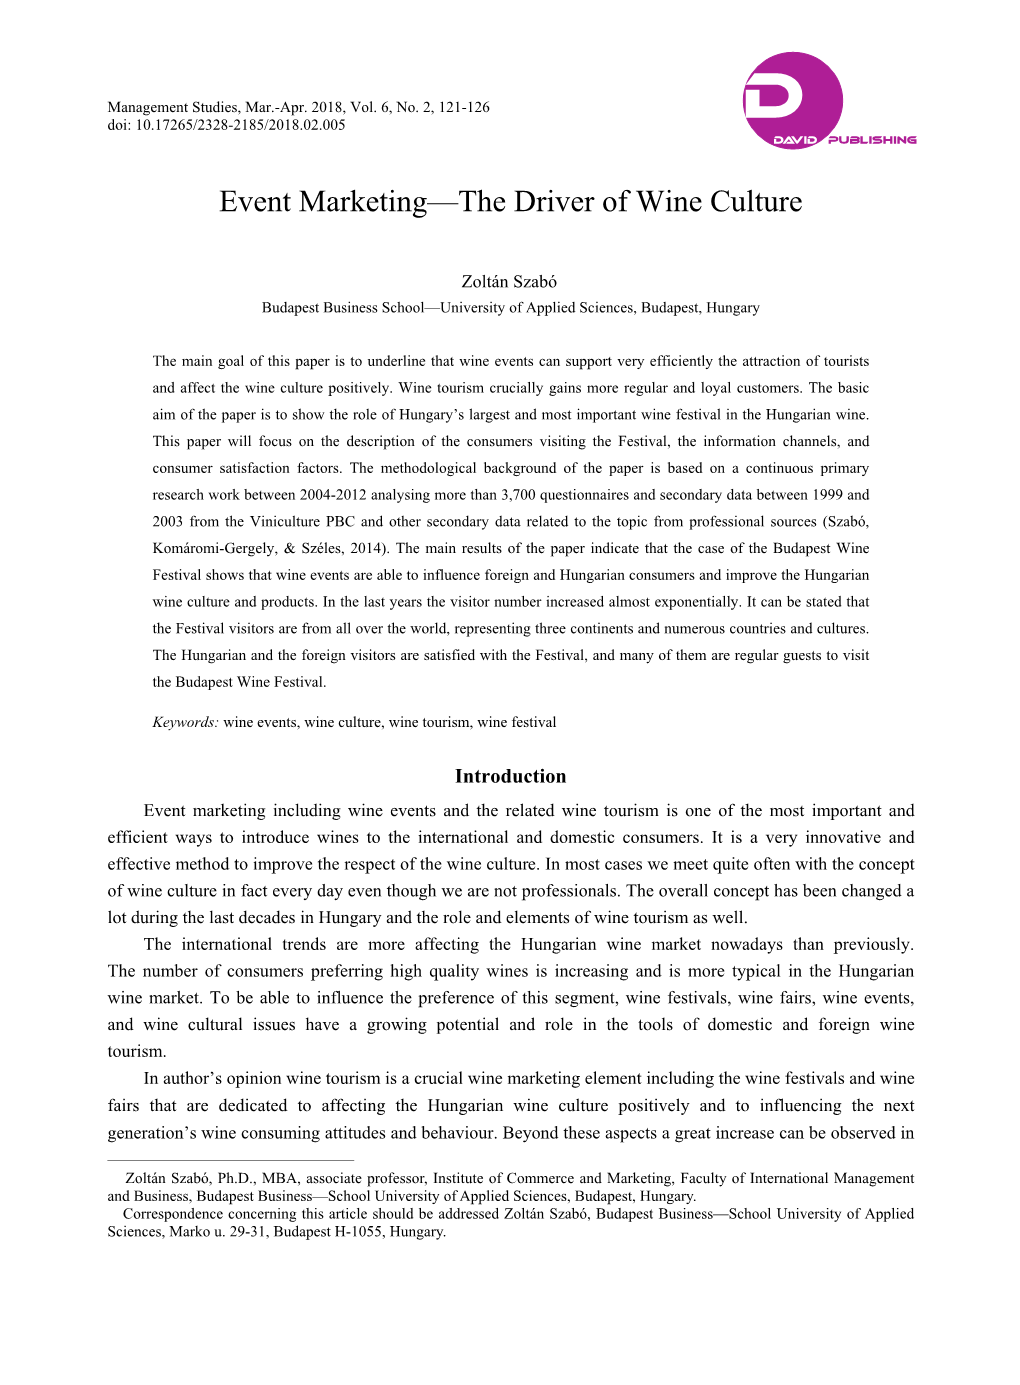 Event Marketing—The Driver of Wine Culture